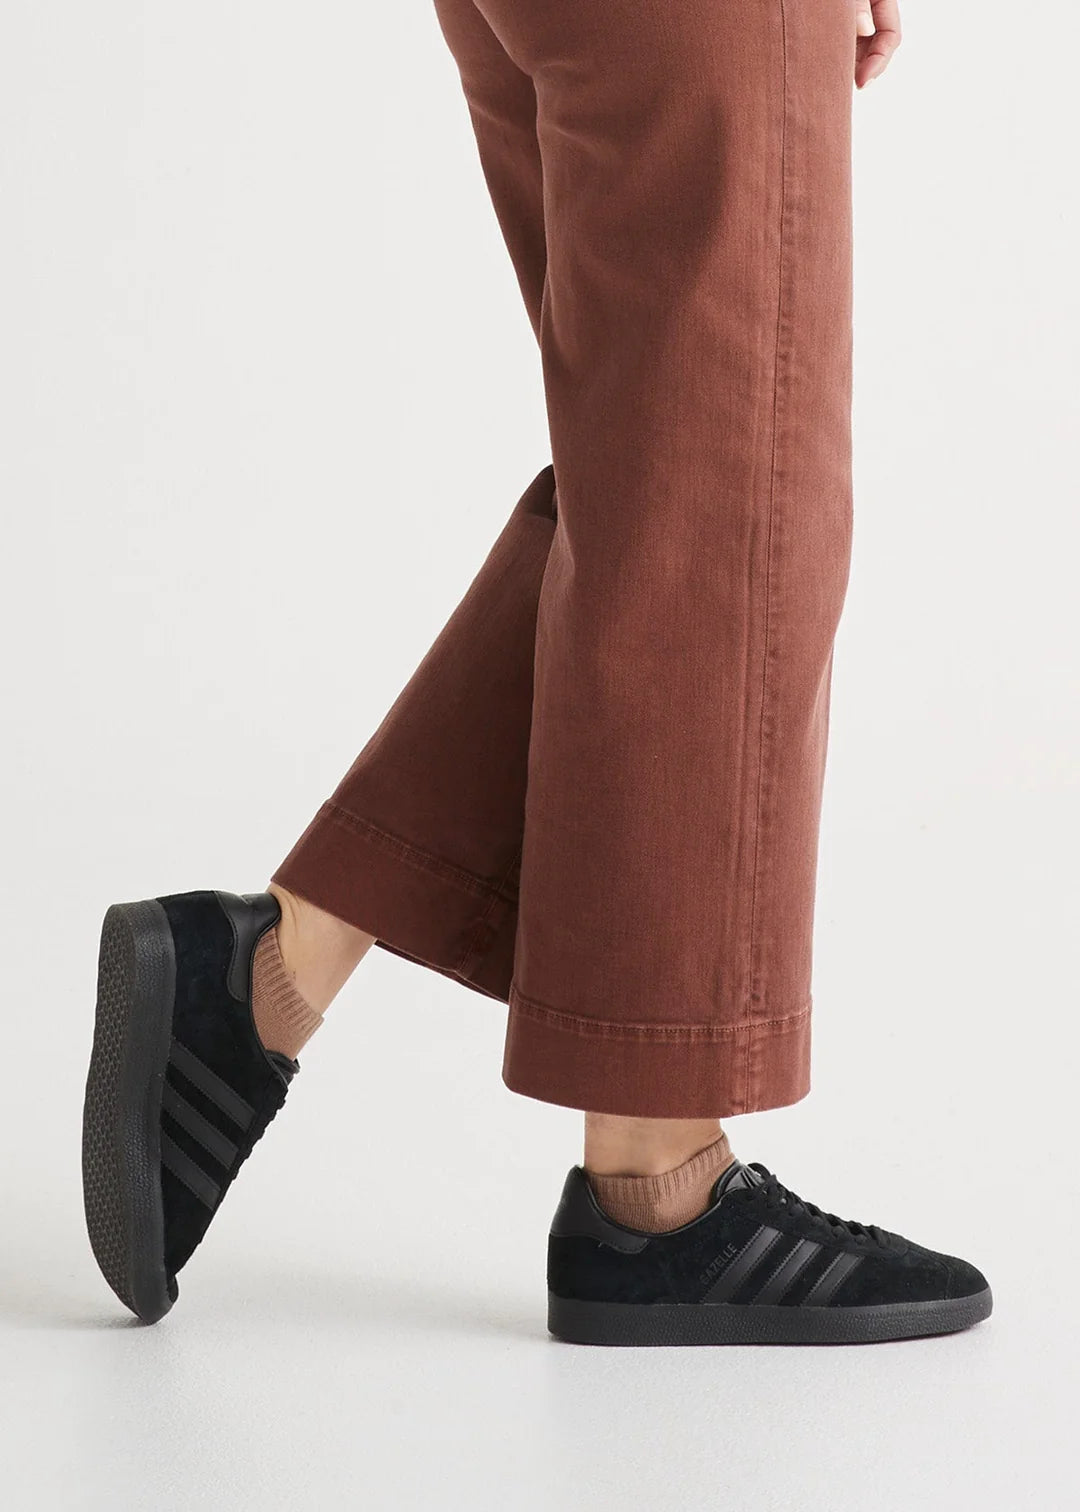 Lux Twill High Rise Trouser